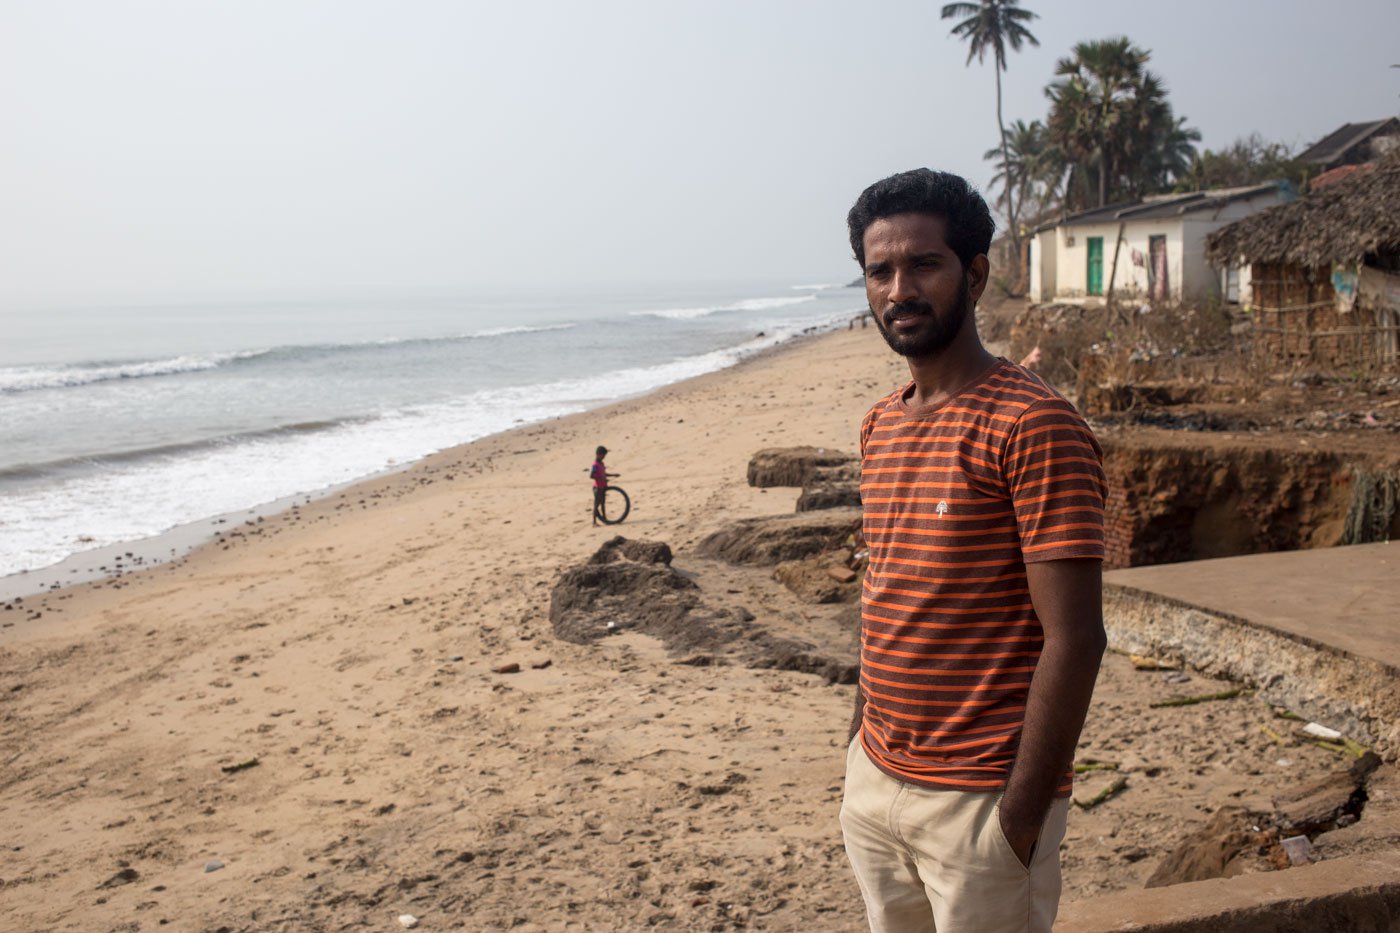 D. Prasad  grew up in the coastal village, where he remembers collecting shells on the beach to sell for pocket money. With the sand and beach disappearing, the shells and buyers also vanished, he says